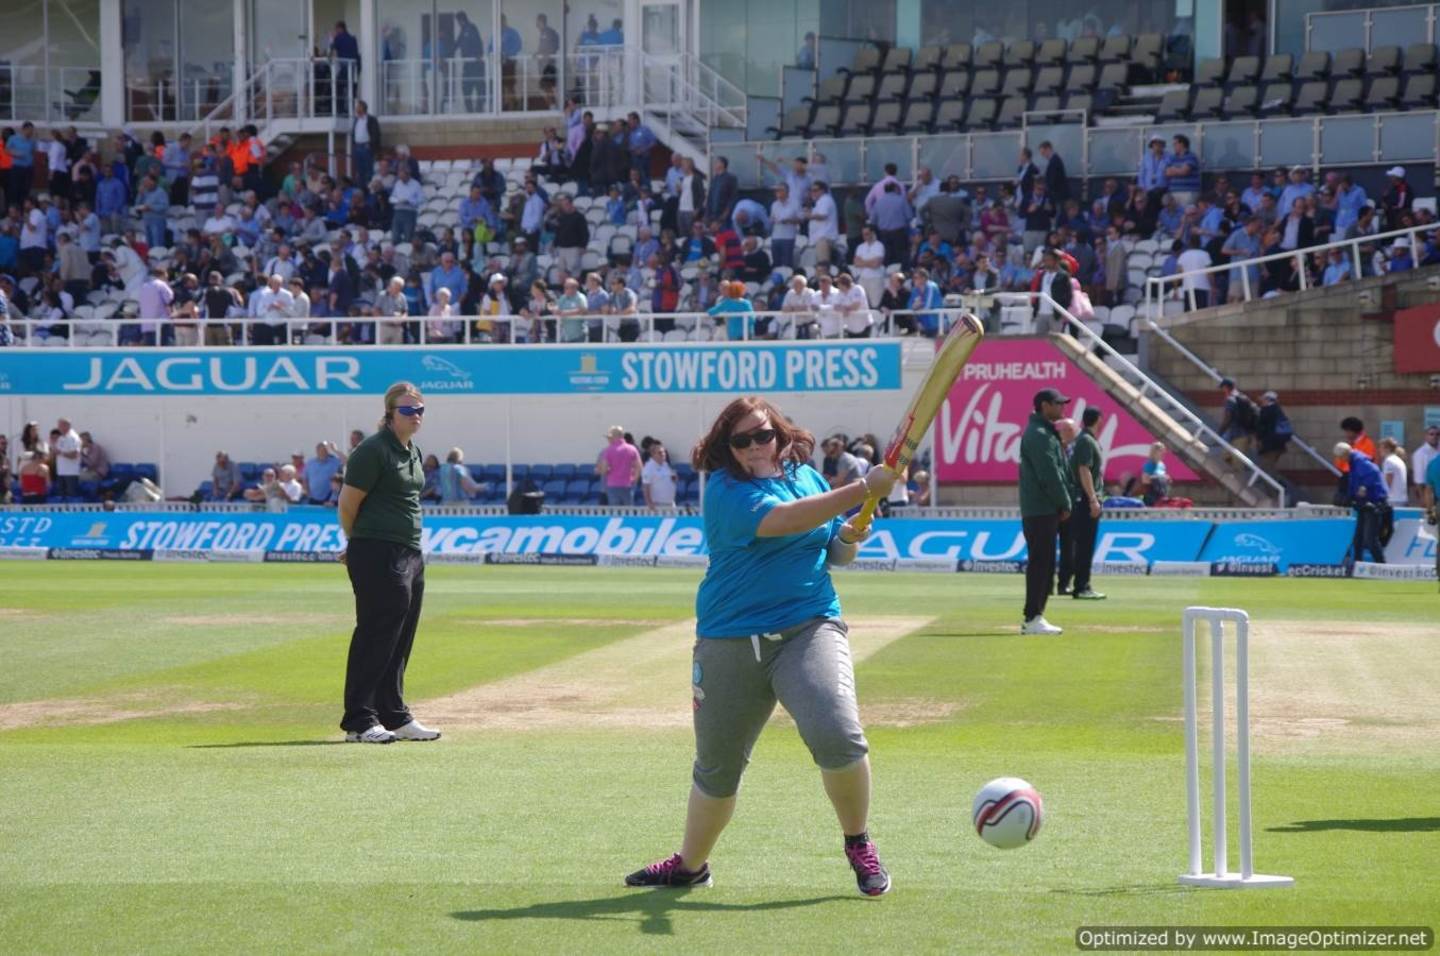 Lois batting during a game of visually-impaired cricket